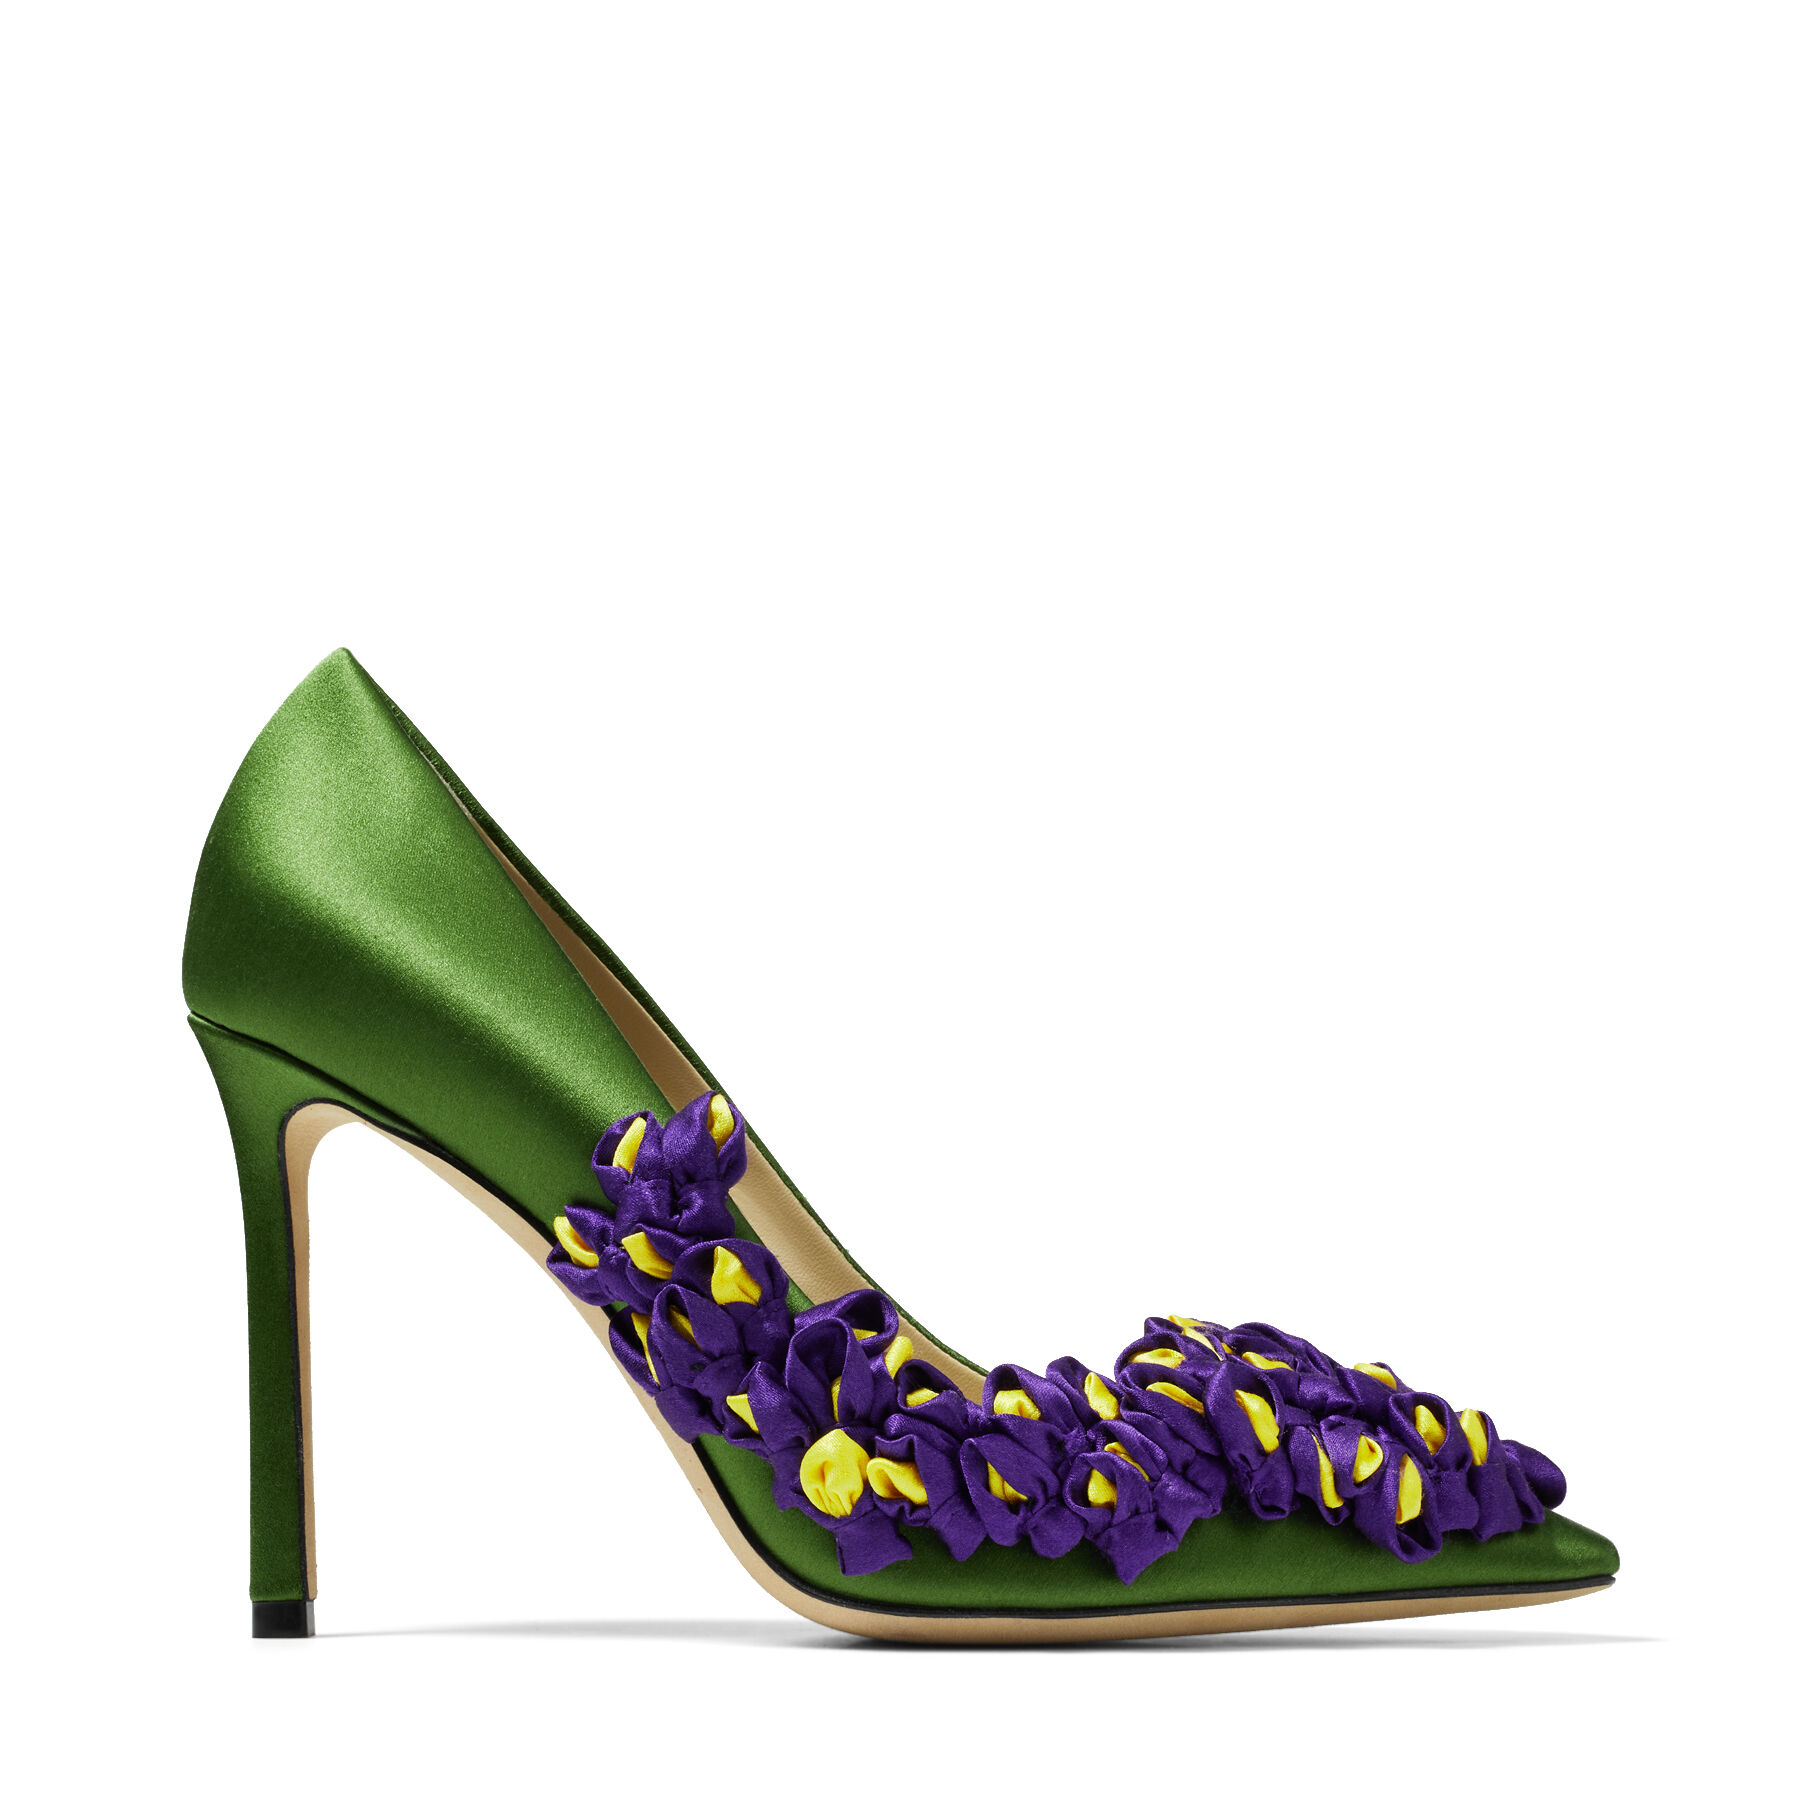 Bourgeon falsk grube Green Satin Pointed Pumps with Purple Embroidered Flowers | WISTERIA | Choo  Sketch | JIMMY CHOO